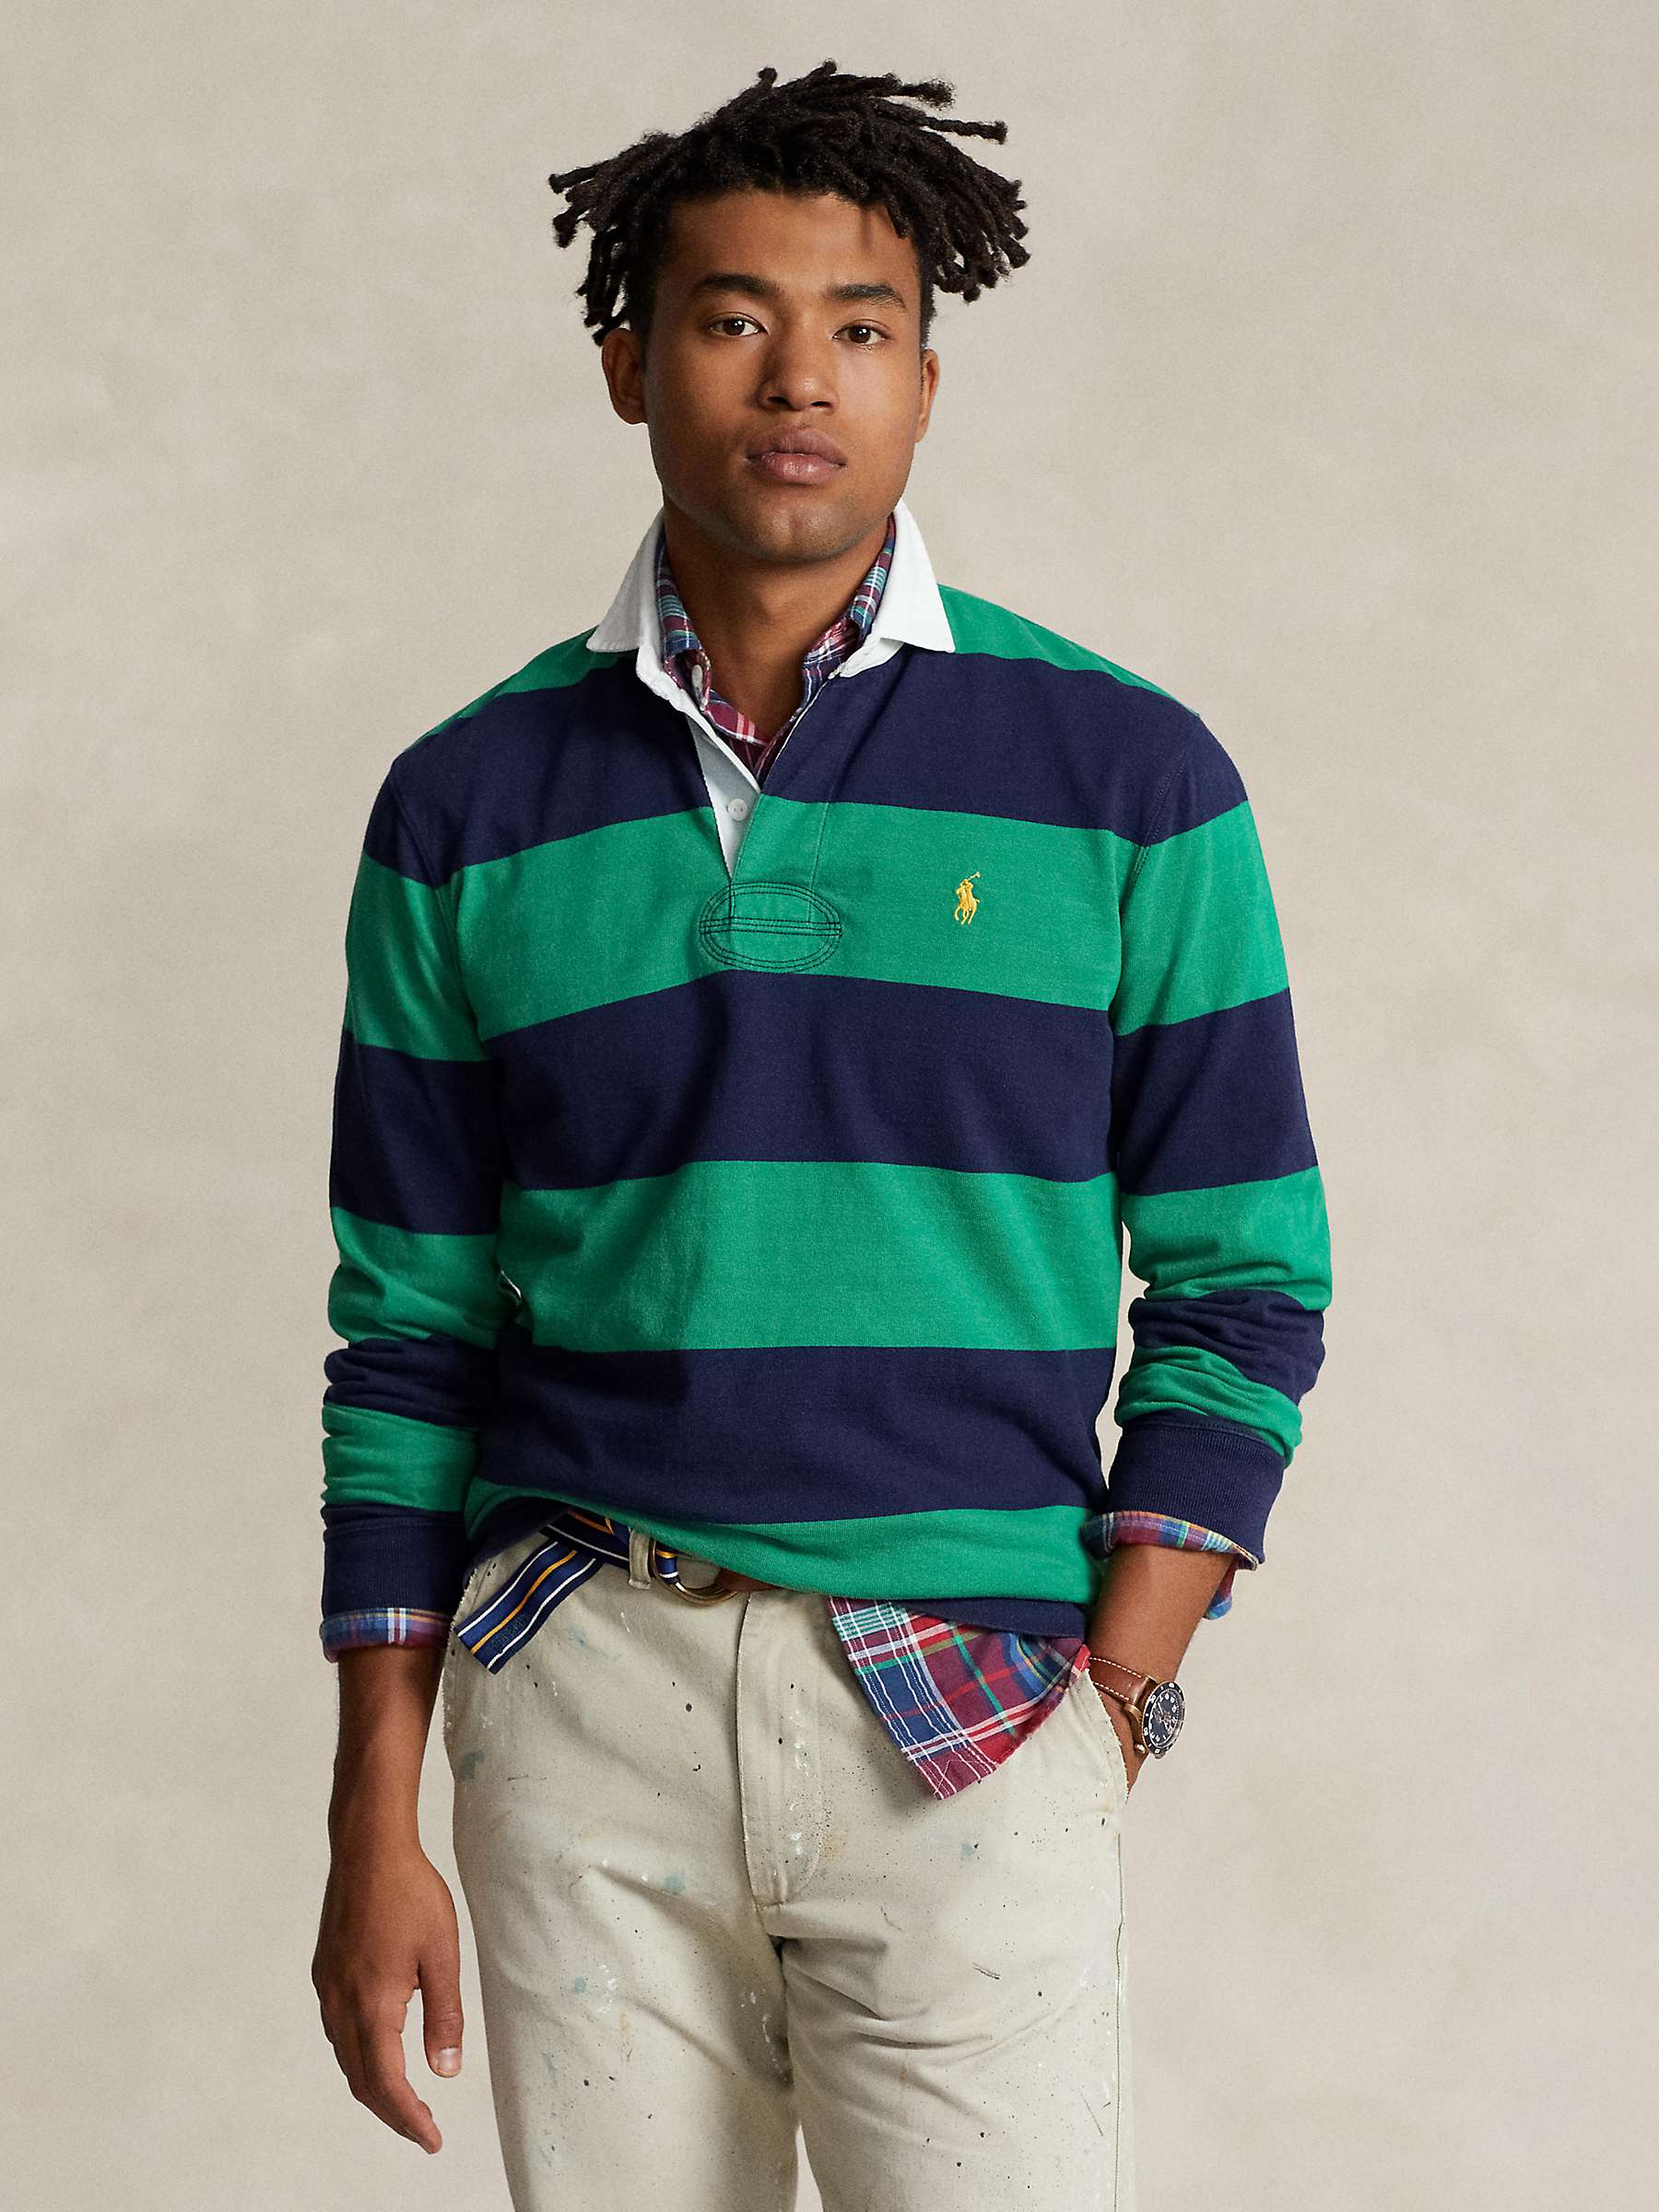 Buy Polo Ralph Lauren Classic Fit Striped Jersey Rugby Shirt Online at johnlewis.com